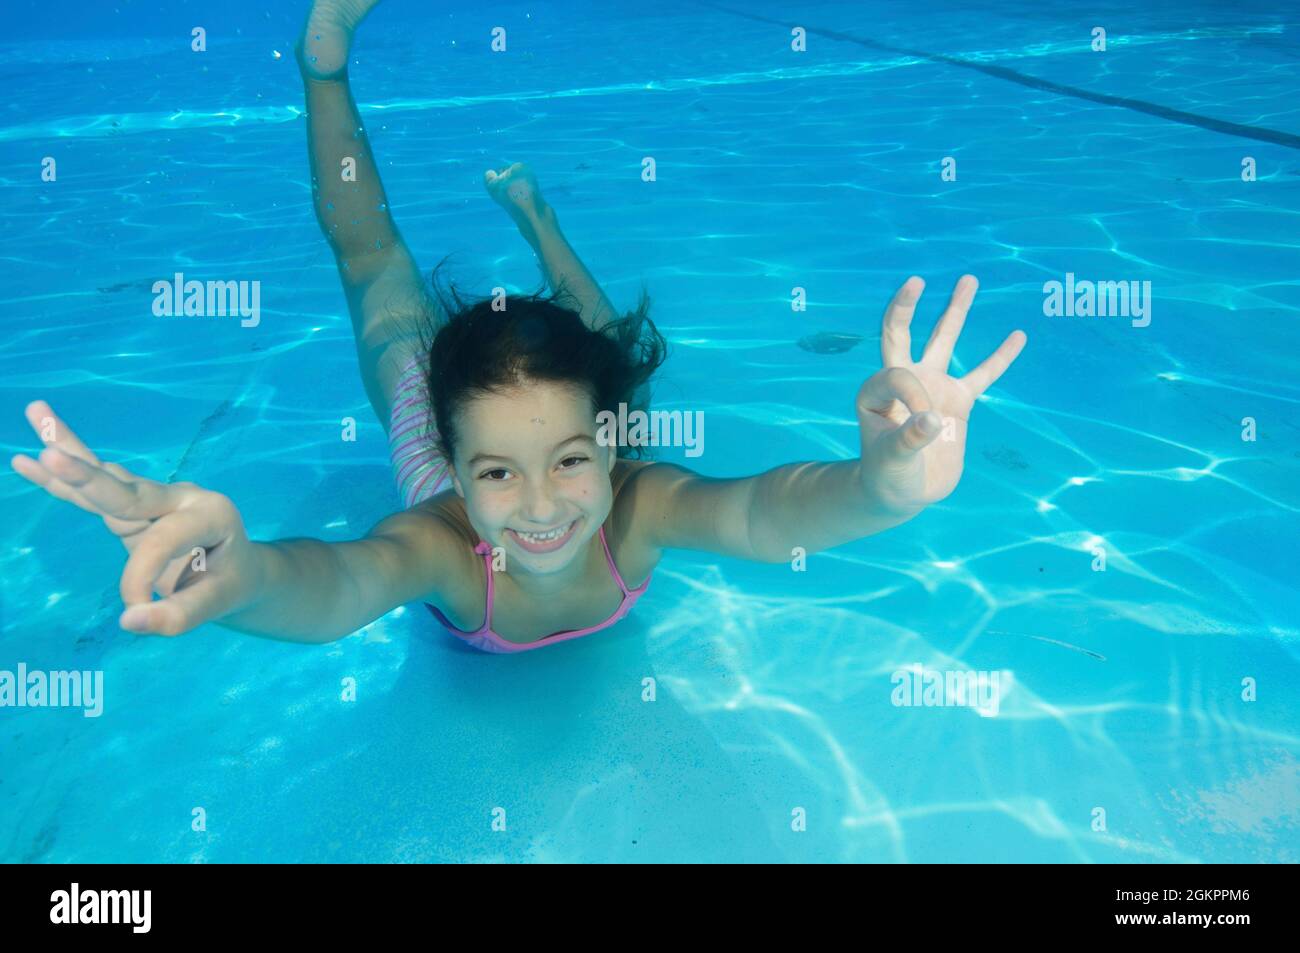 Young girl of 7 swimming underwater gives the OK hand gesture Stock Photo